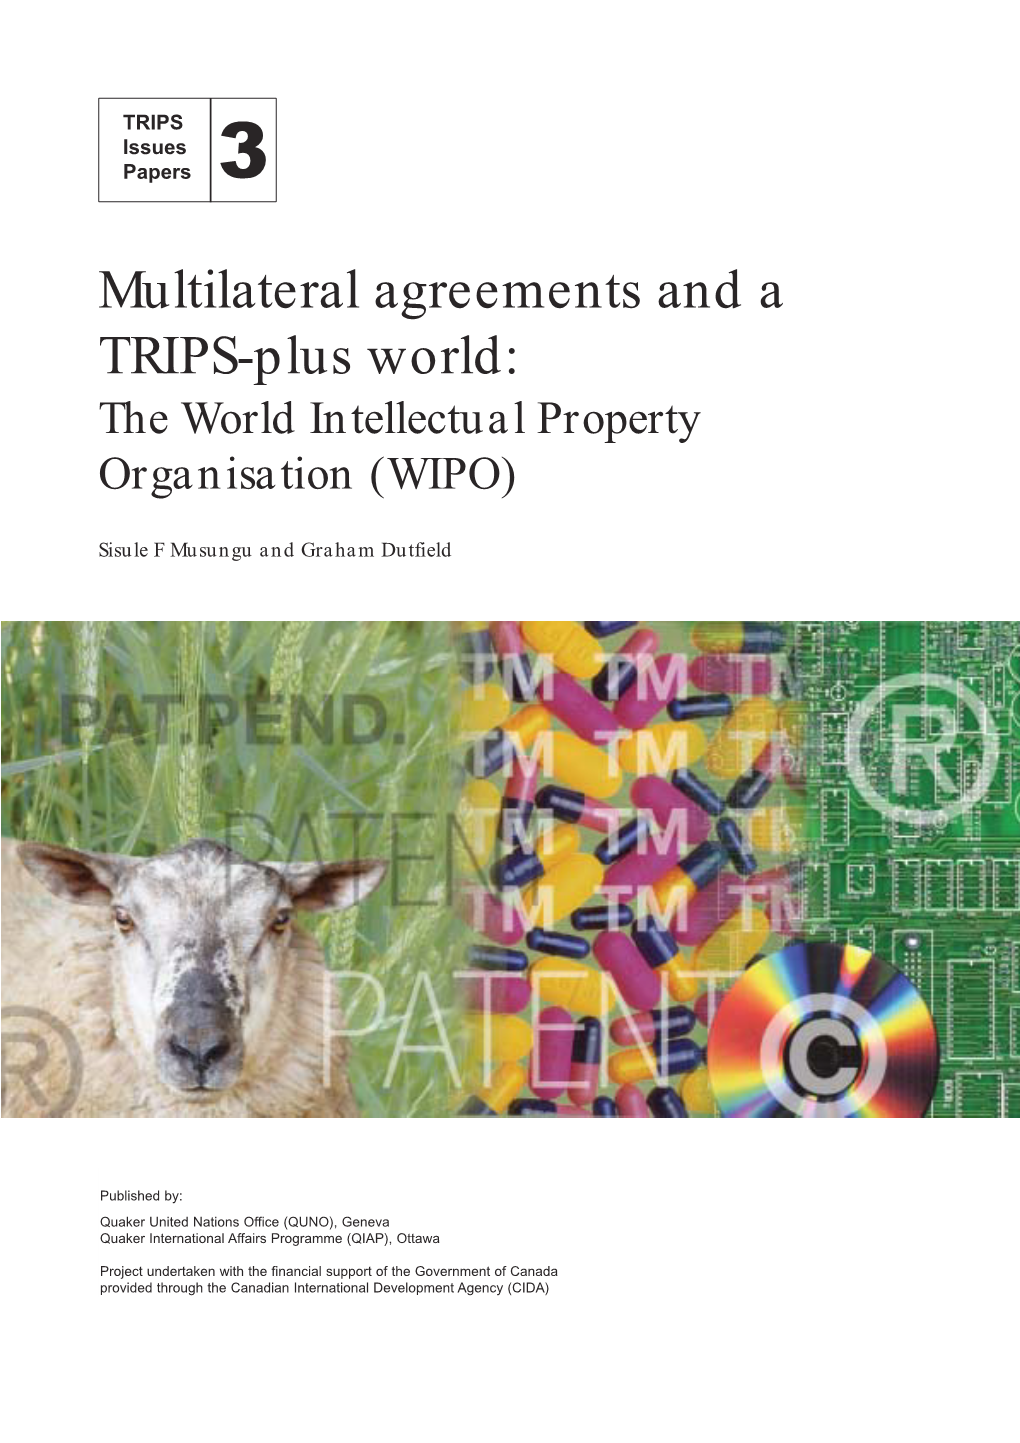 Multilateral Agreements and a TRIPS-Plus World: the World Intellectual Property Organization